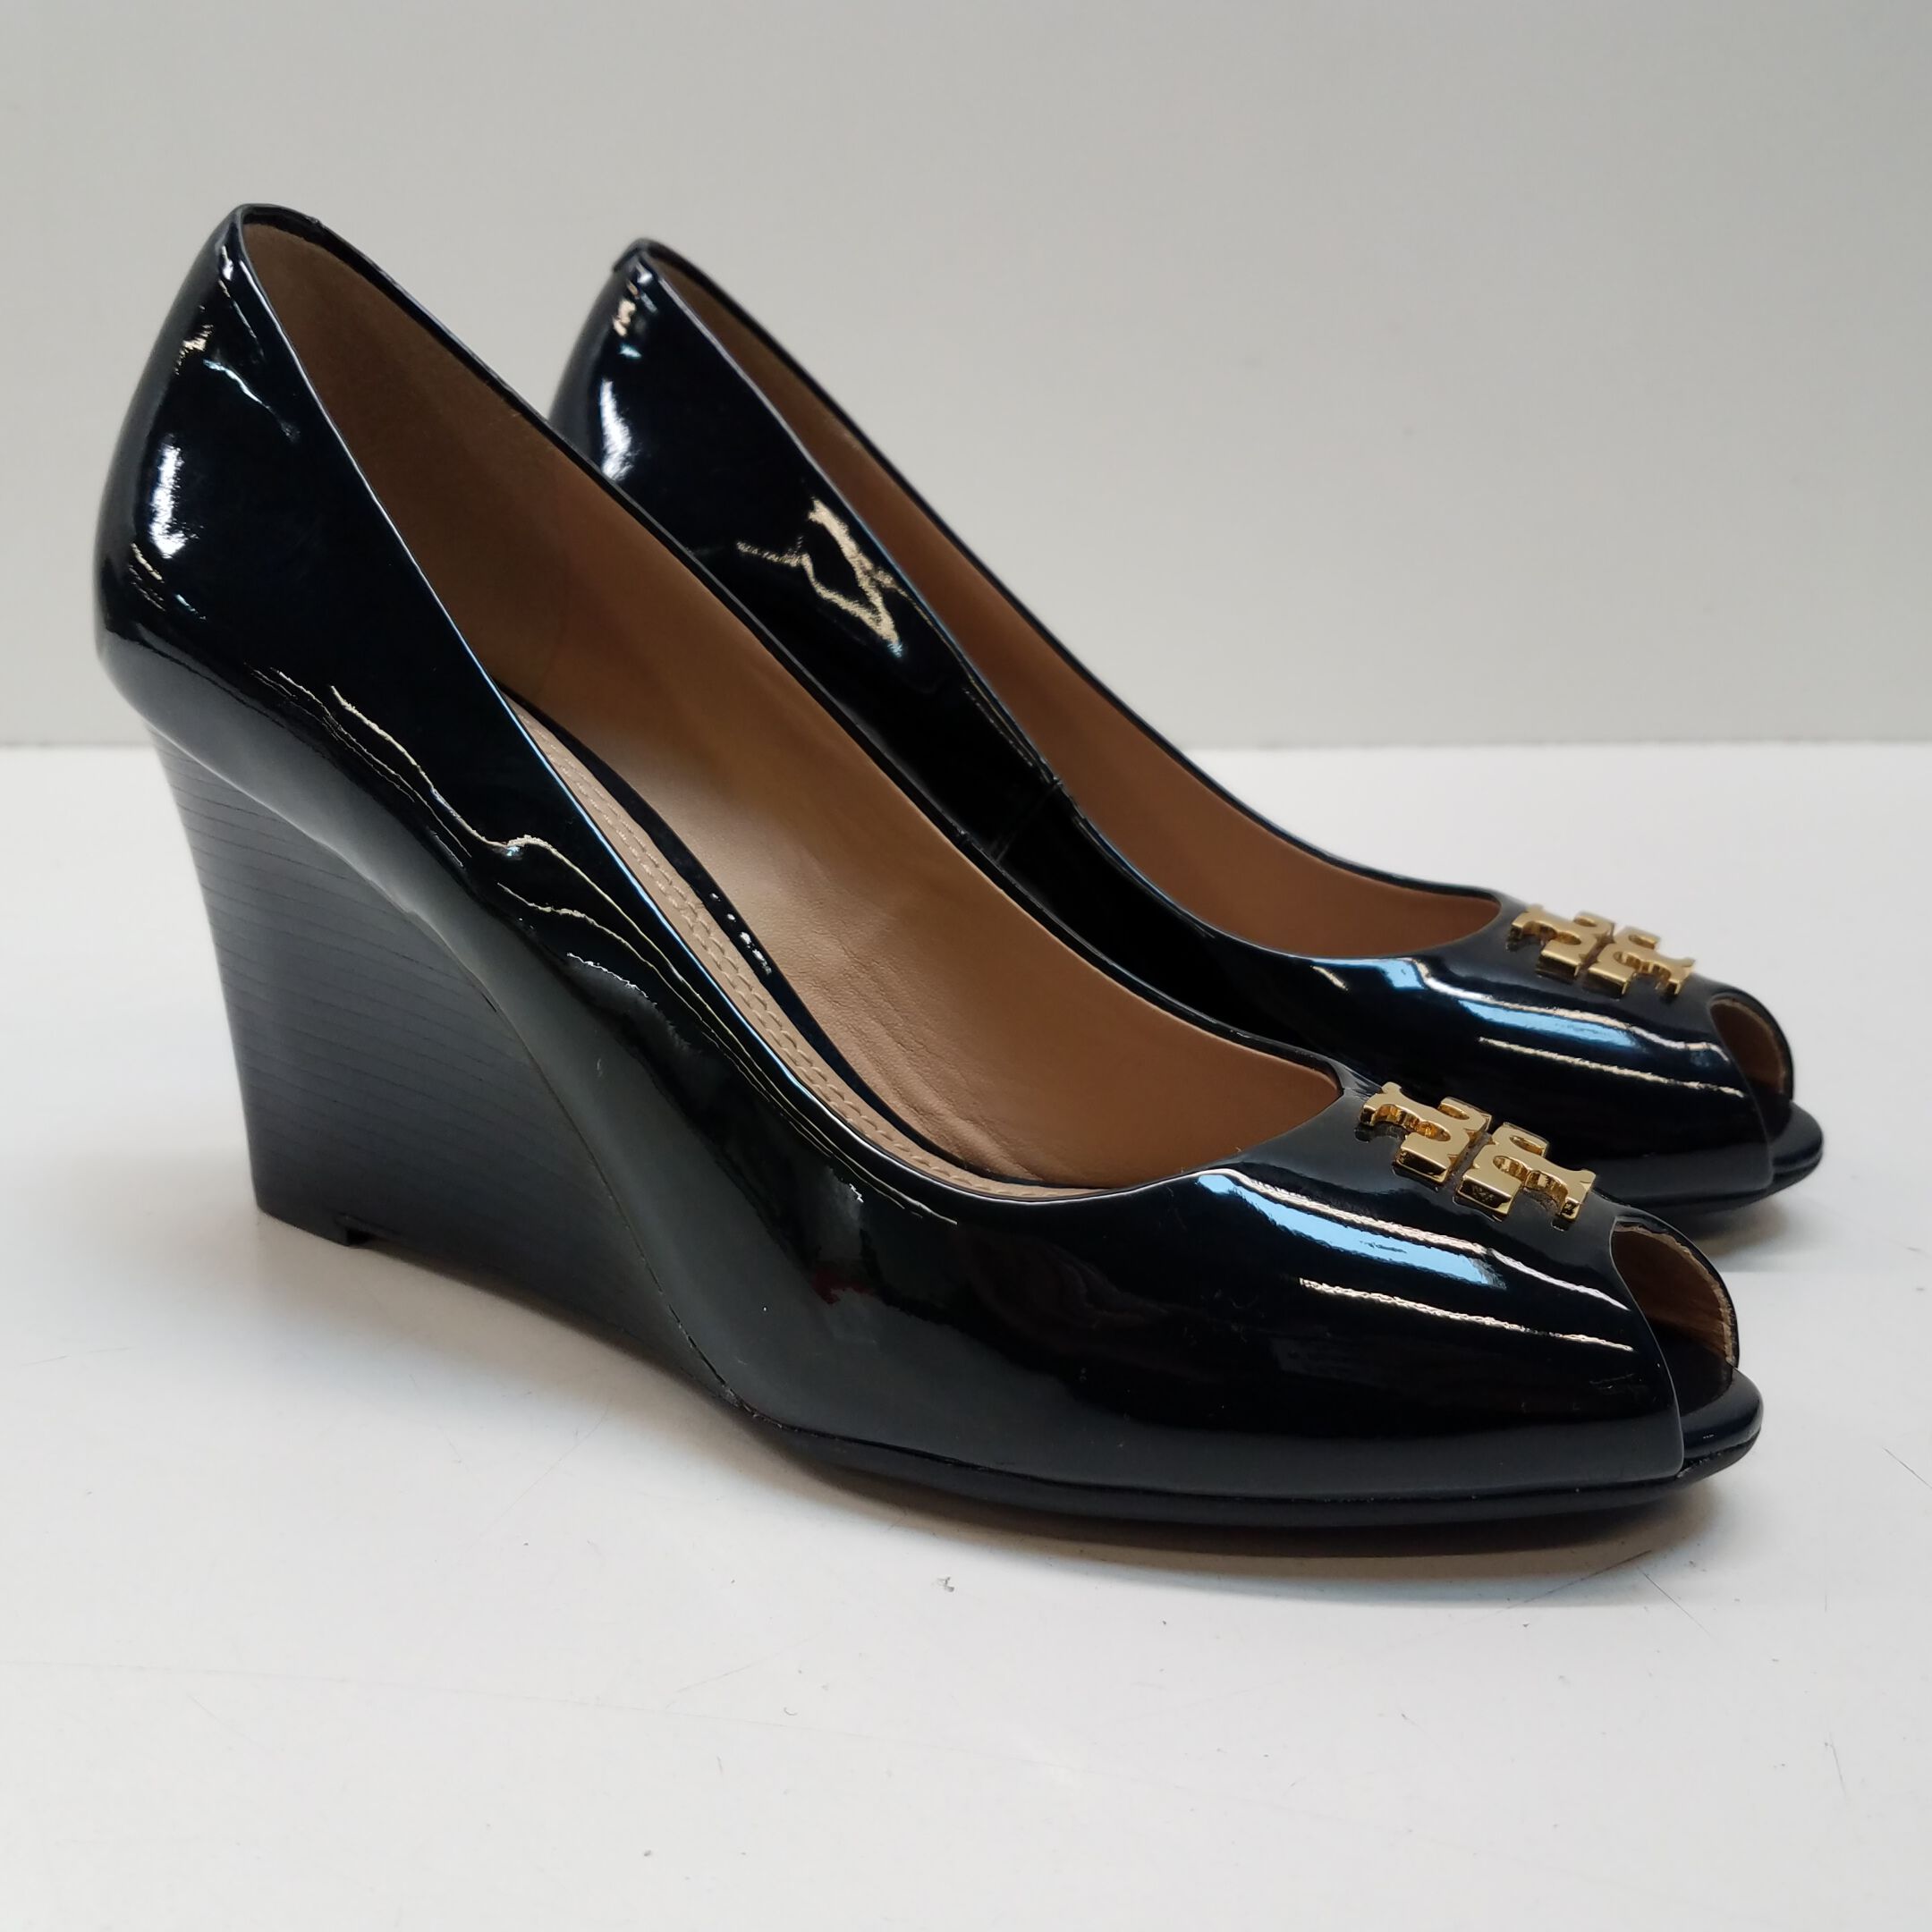 TORY BURCH PATENT LEATHER WEDGES 